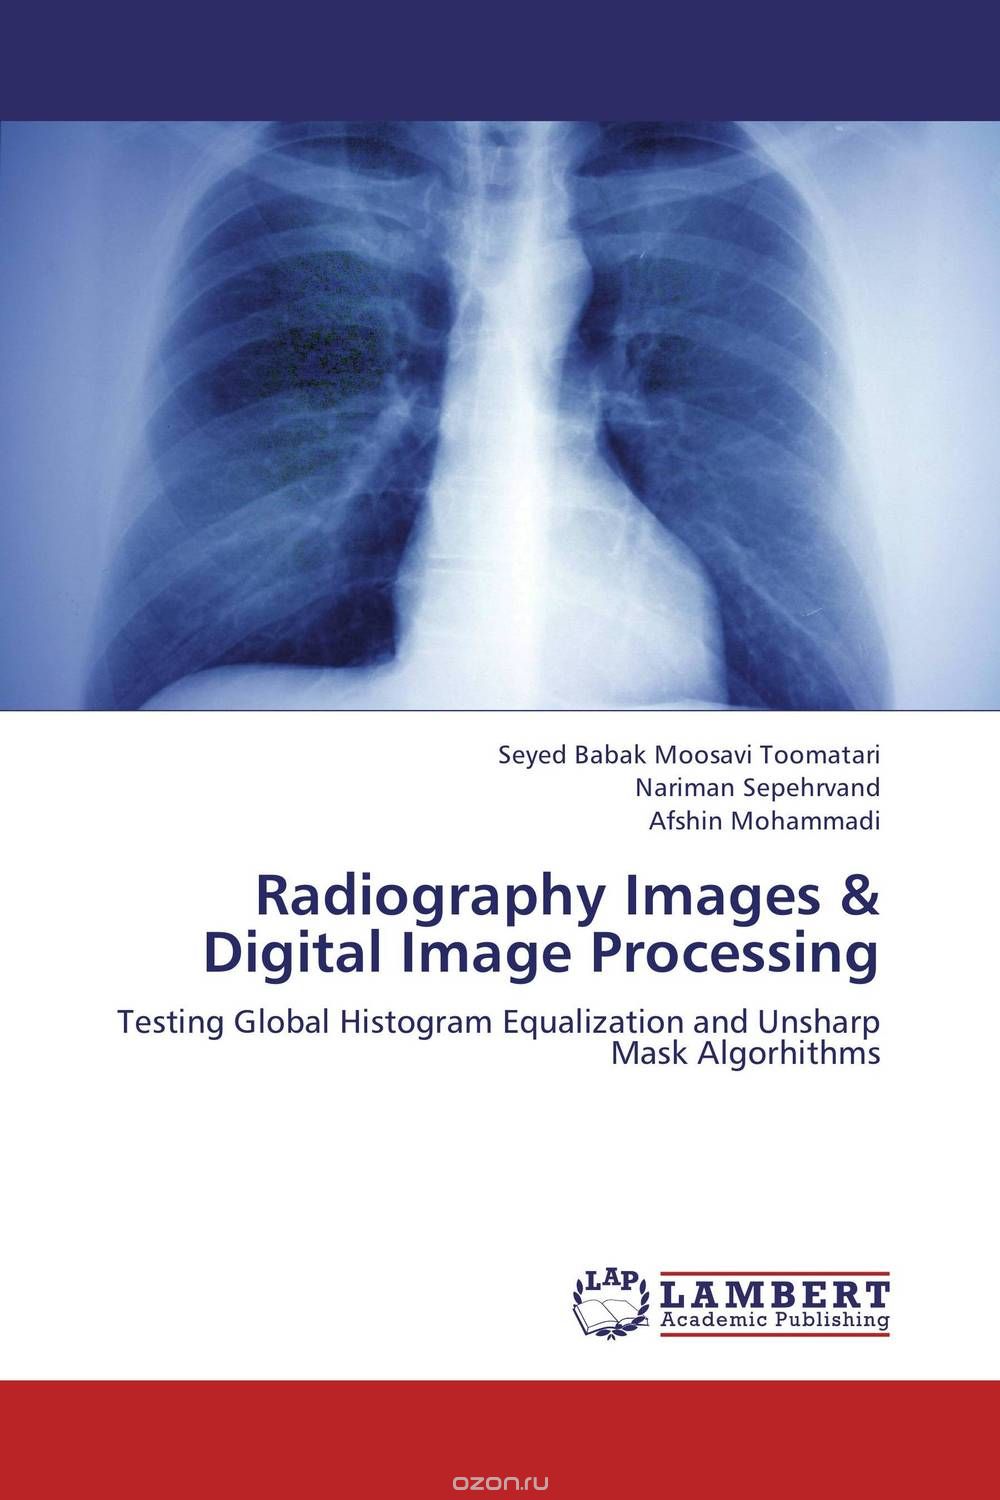 Radiography Images & Digital Image Processing